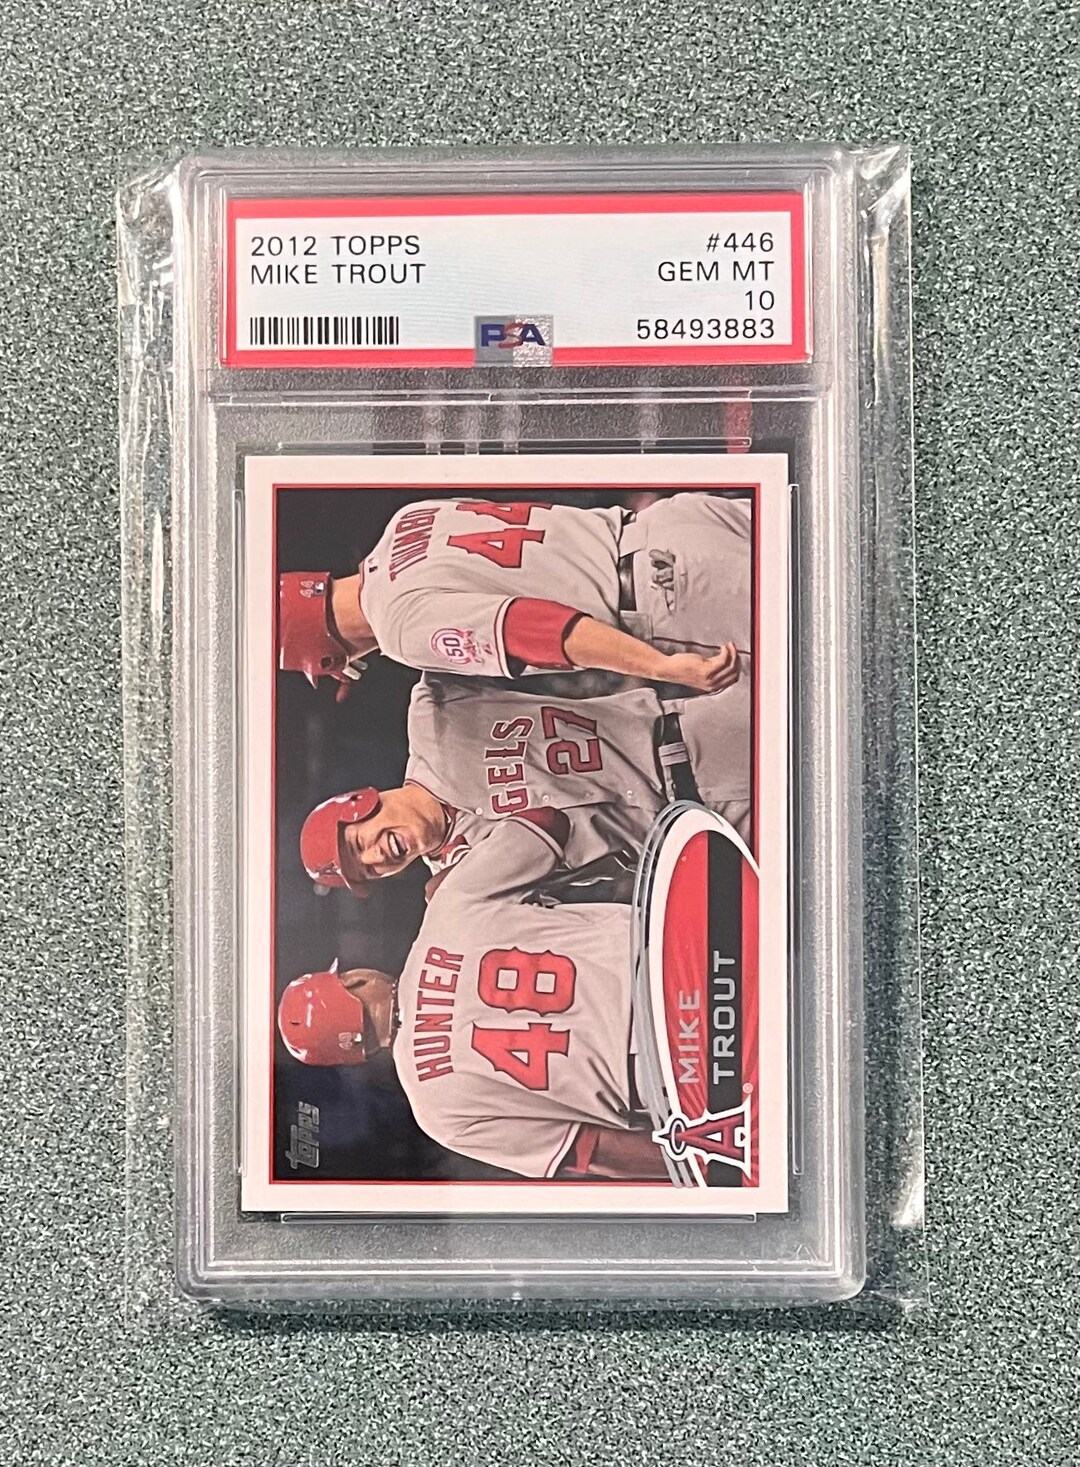 2012 Topps Mike Trout Rookie Card #446 Angels Trout mint from pack